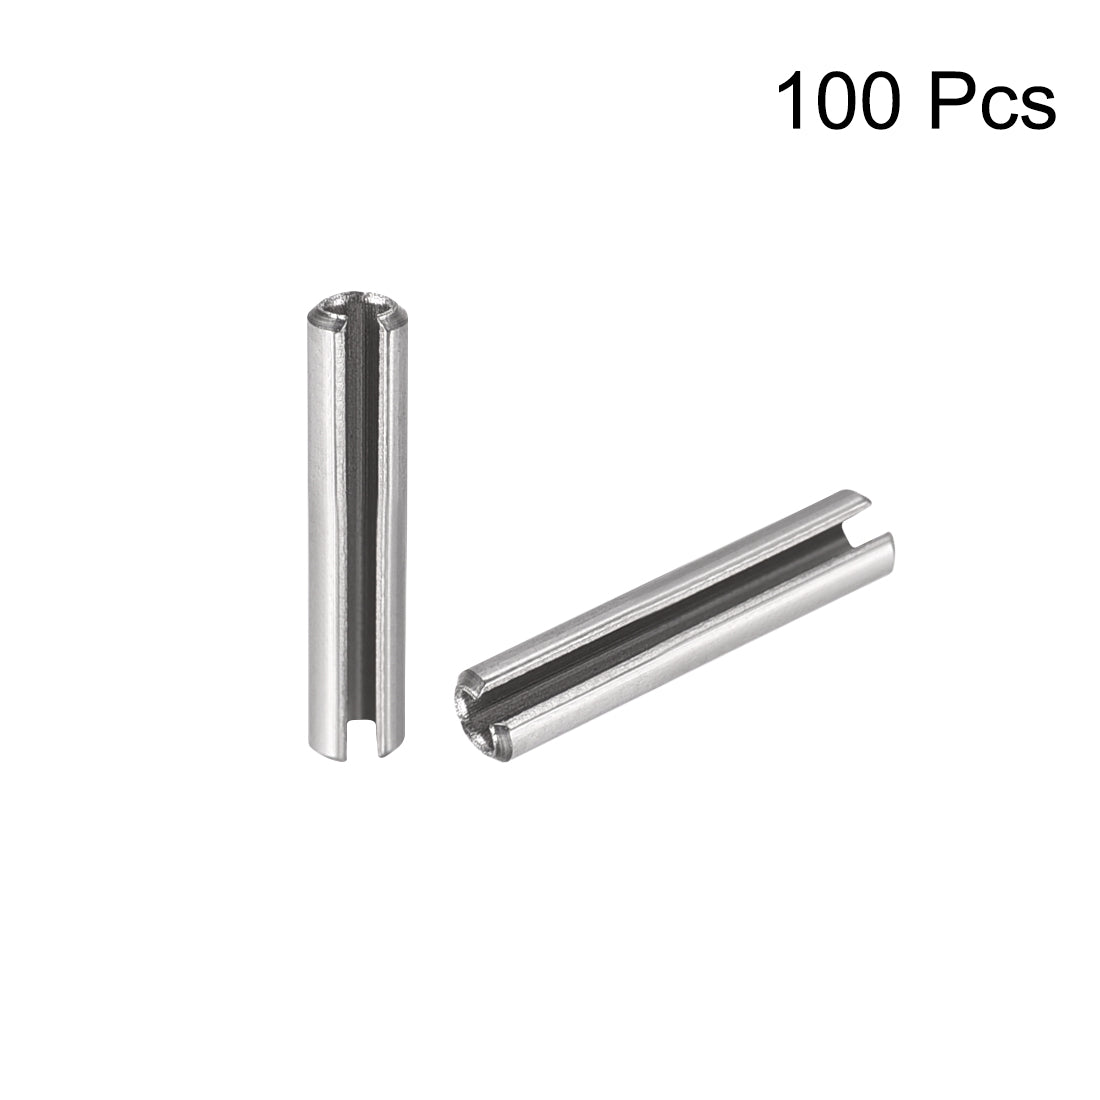 Uxcell Uxcell M2 x 16mm 304 Stainless Steel Split Spring Roll Dowel Pins Plain Finish 100Pcs